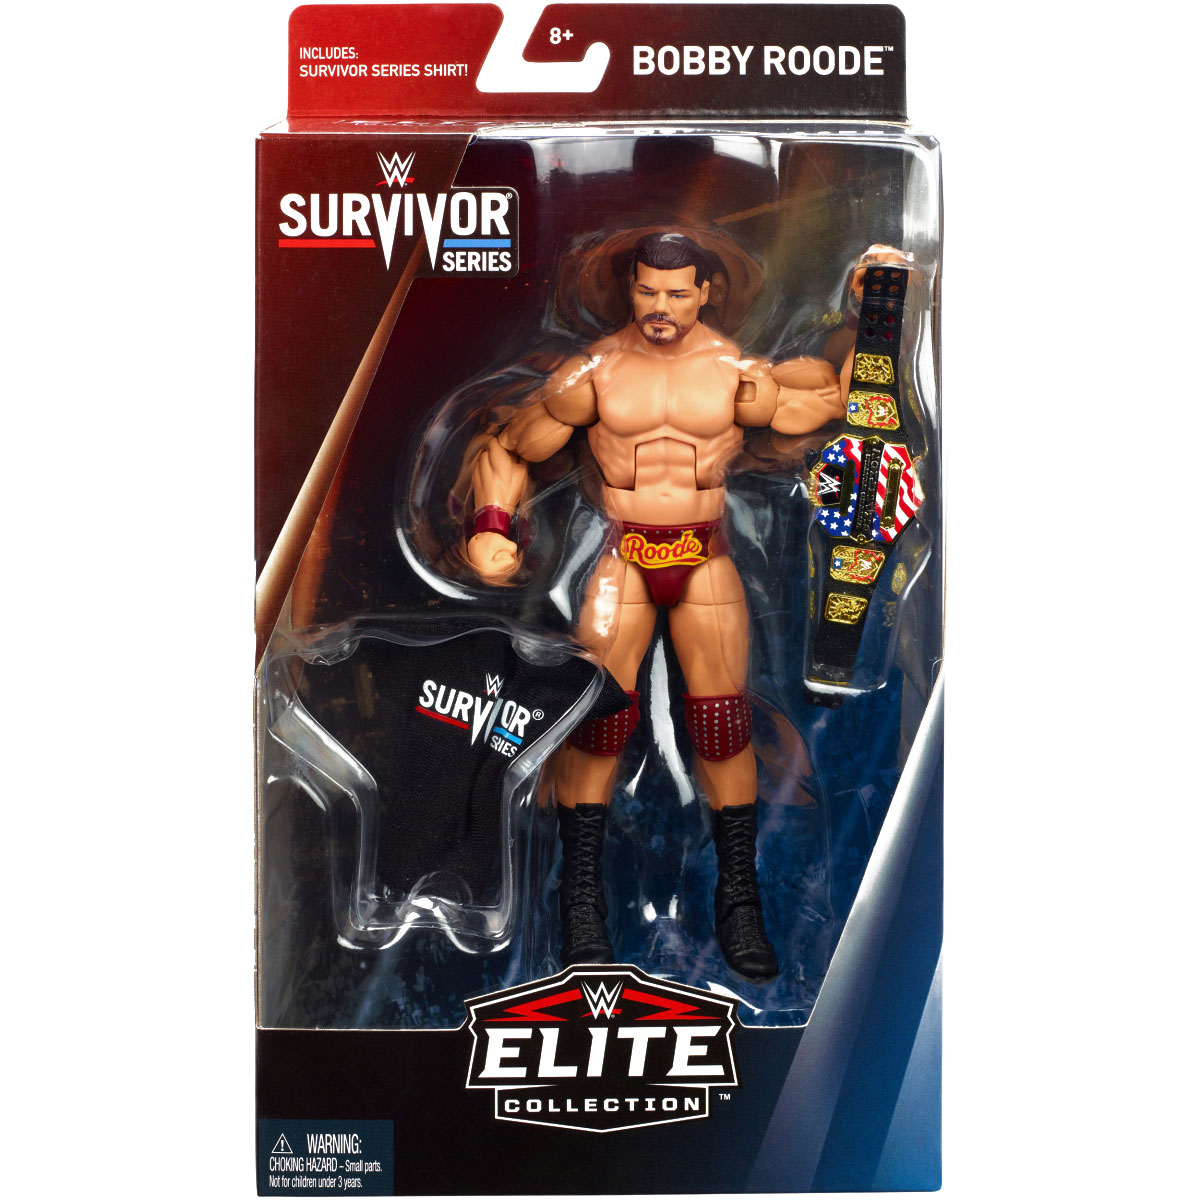 WWE Survivor Series Bobby Roode Elite Collection Action Figure 